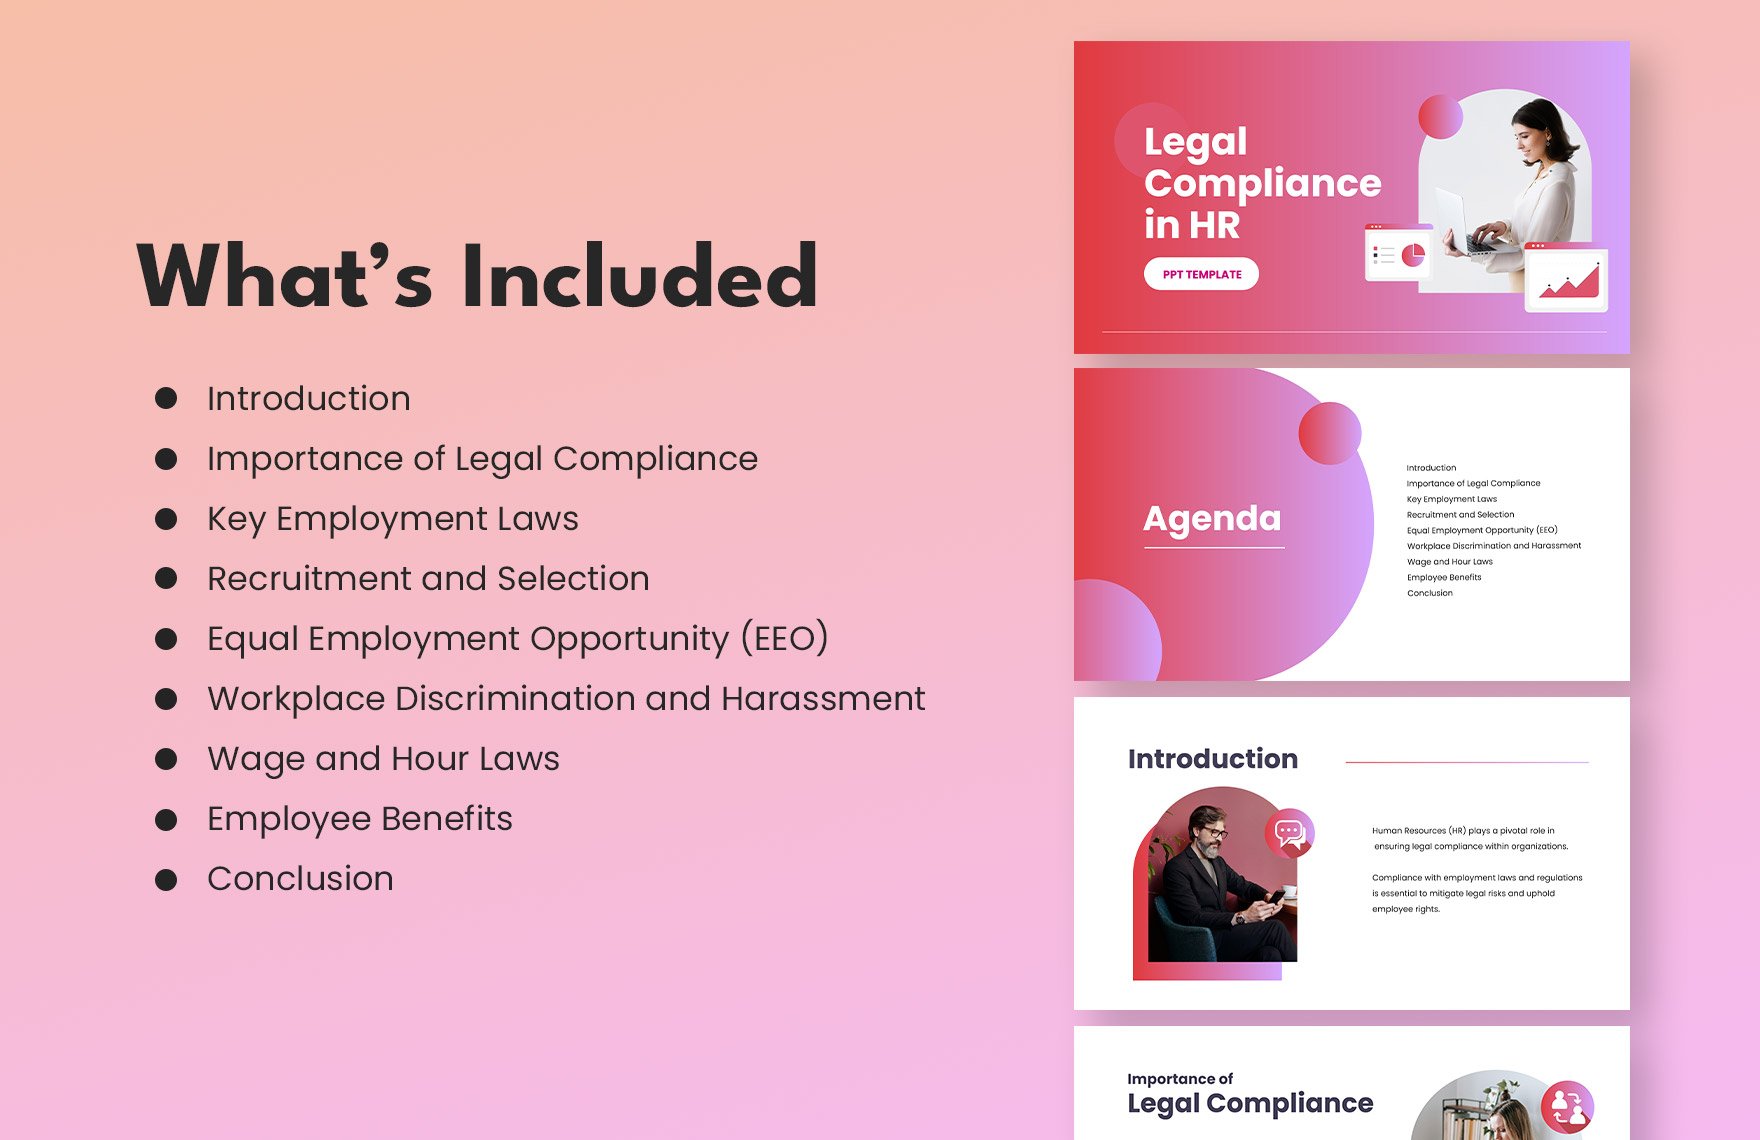 Legal Compliance in HR PPT Template